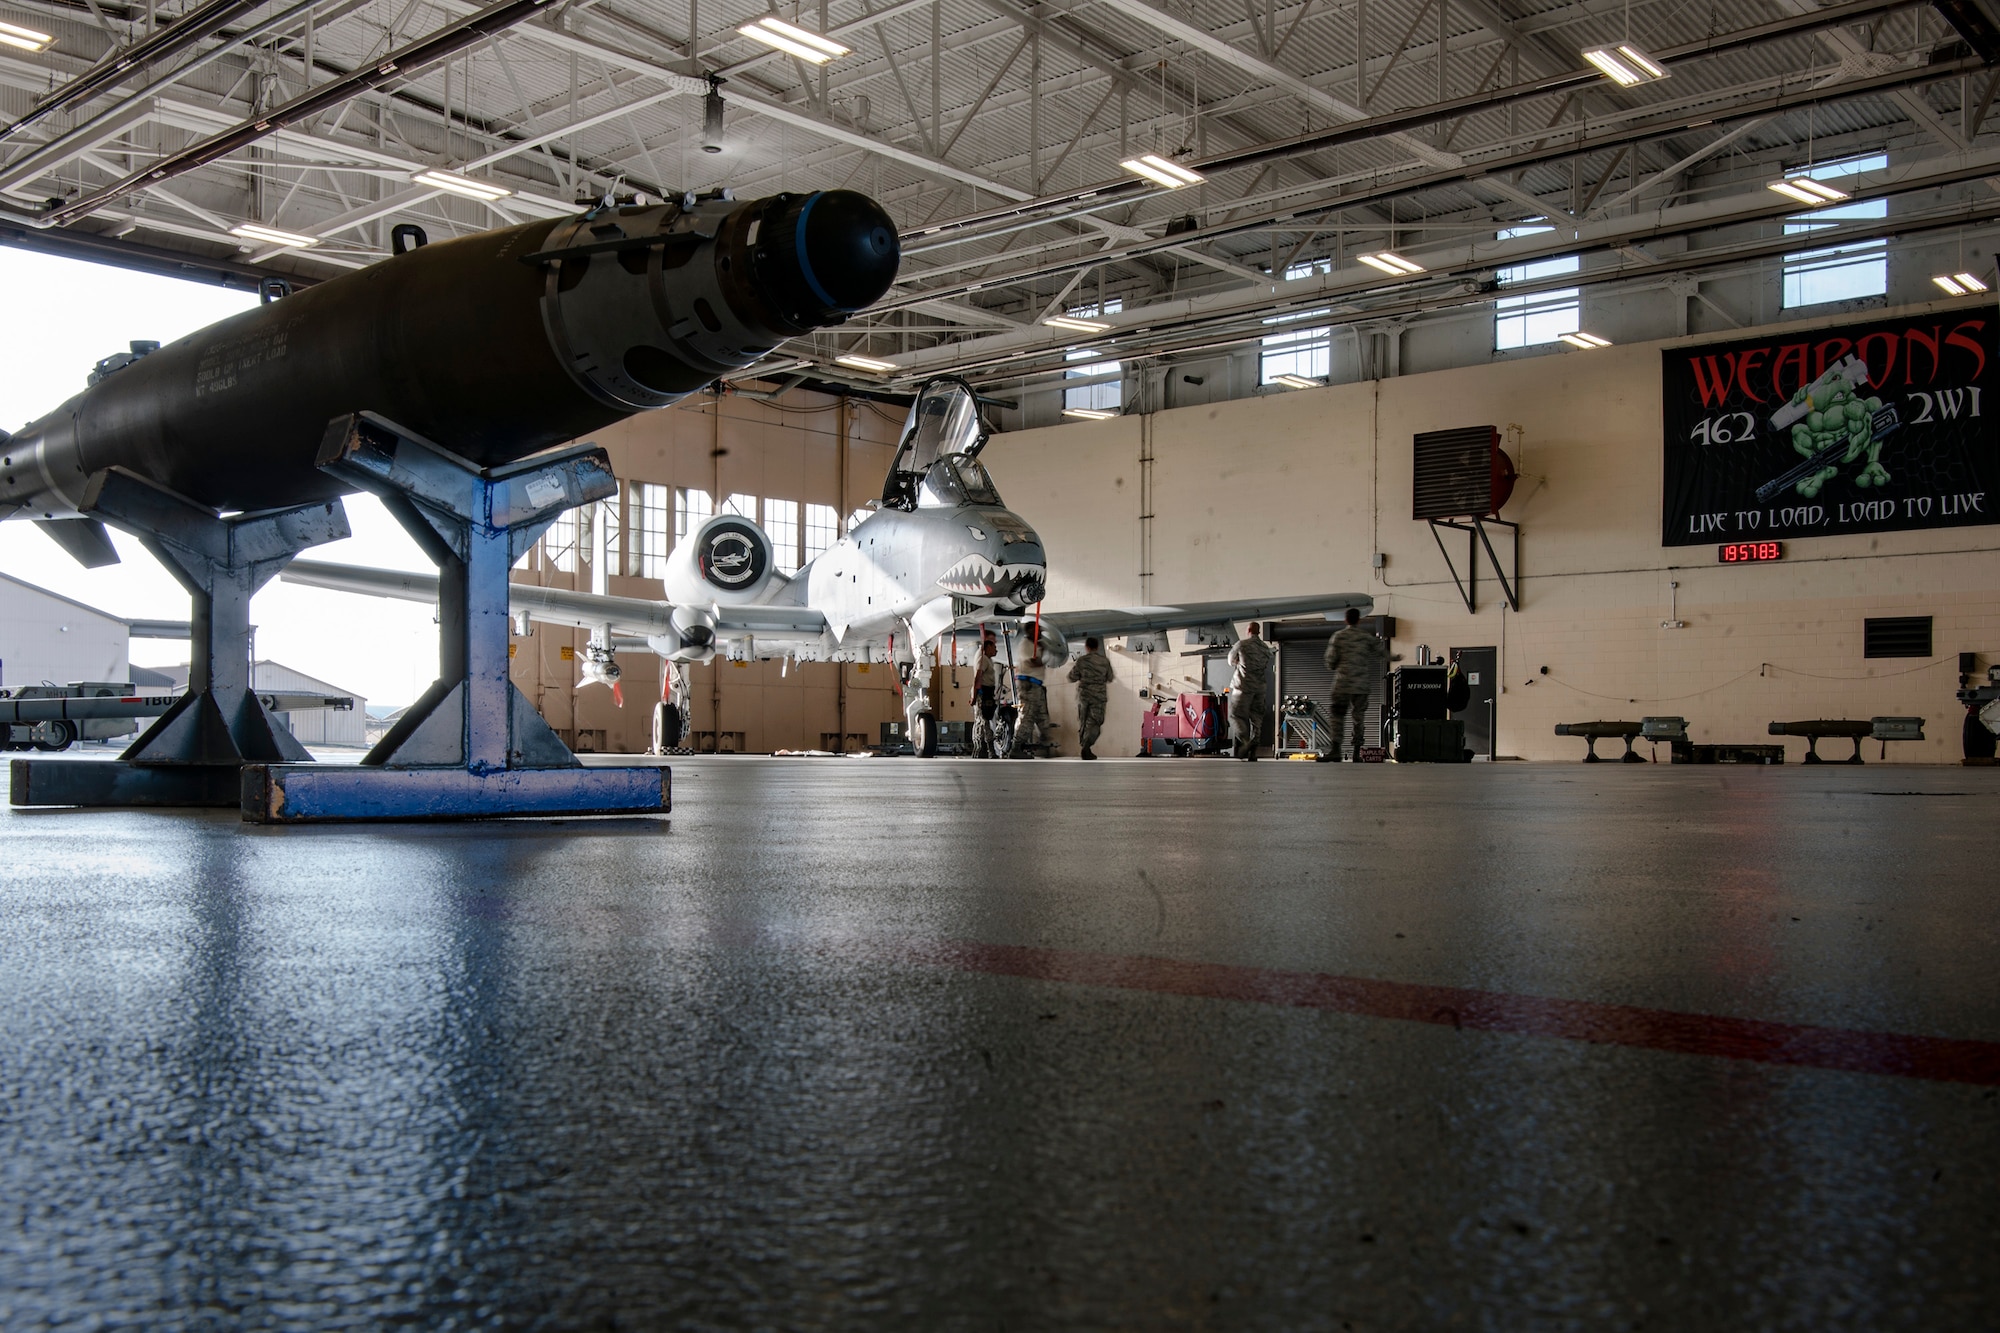 A bomb rests on a stand at the weapons standardization section, Aug. 7, 2018, at Moody Air Force Base, Ga. The weapons standardization section ensures weapons load crews are combat ready through evaluations consisting of MPRLs, semi-annual evaluations and flightline inspections. (U.S. Air Force photo by Airman Taryn Butler)